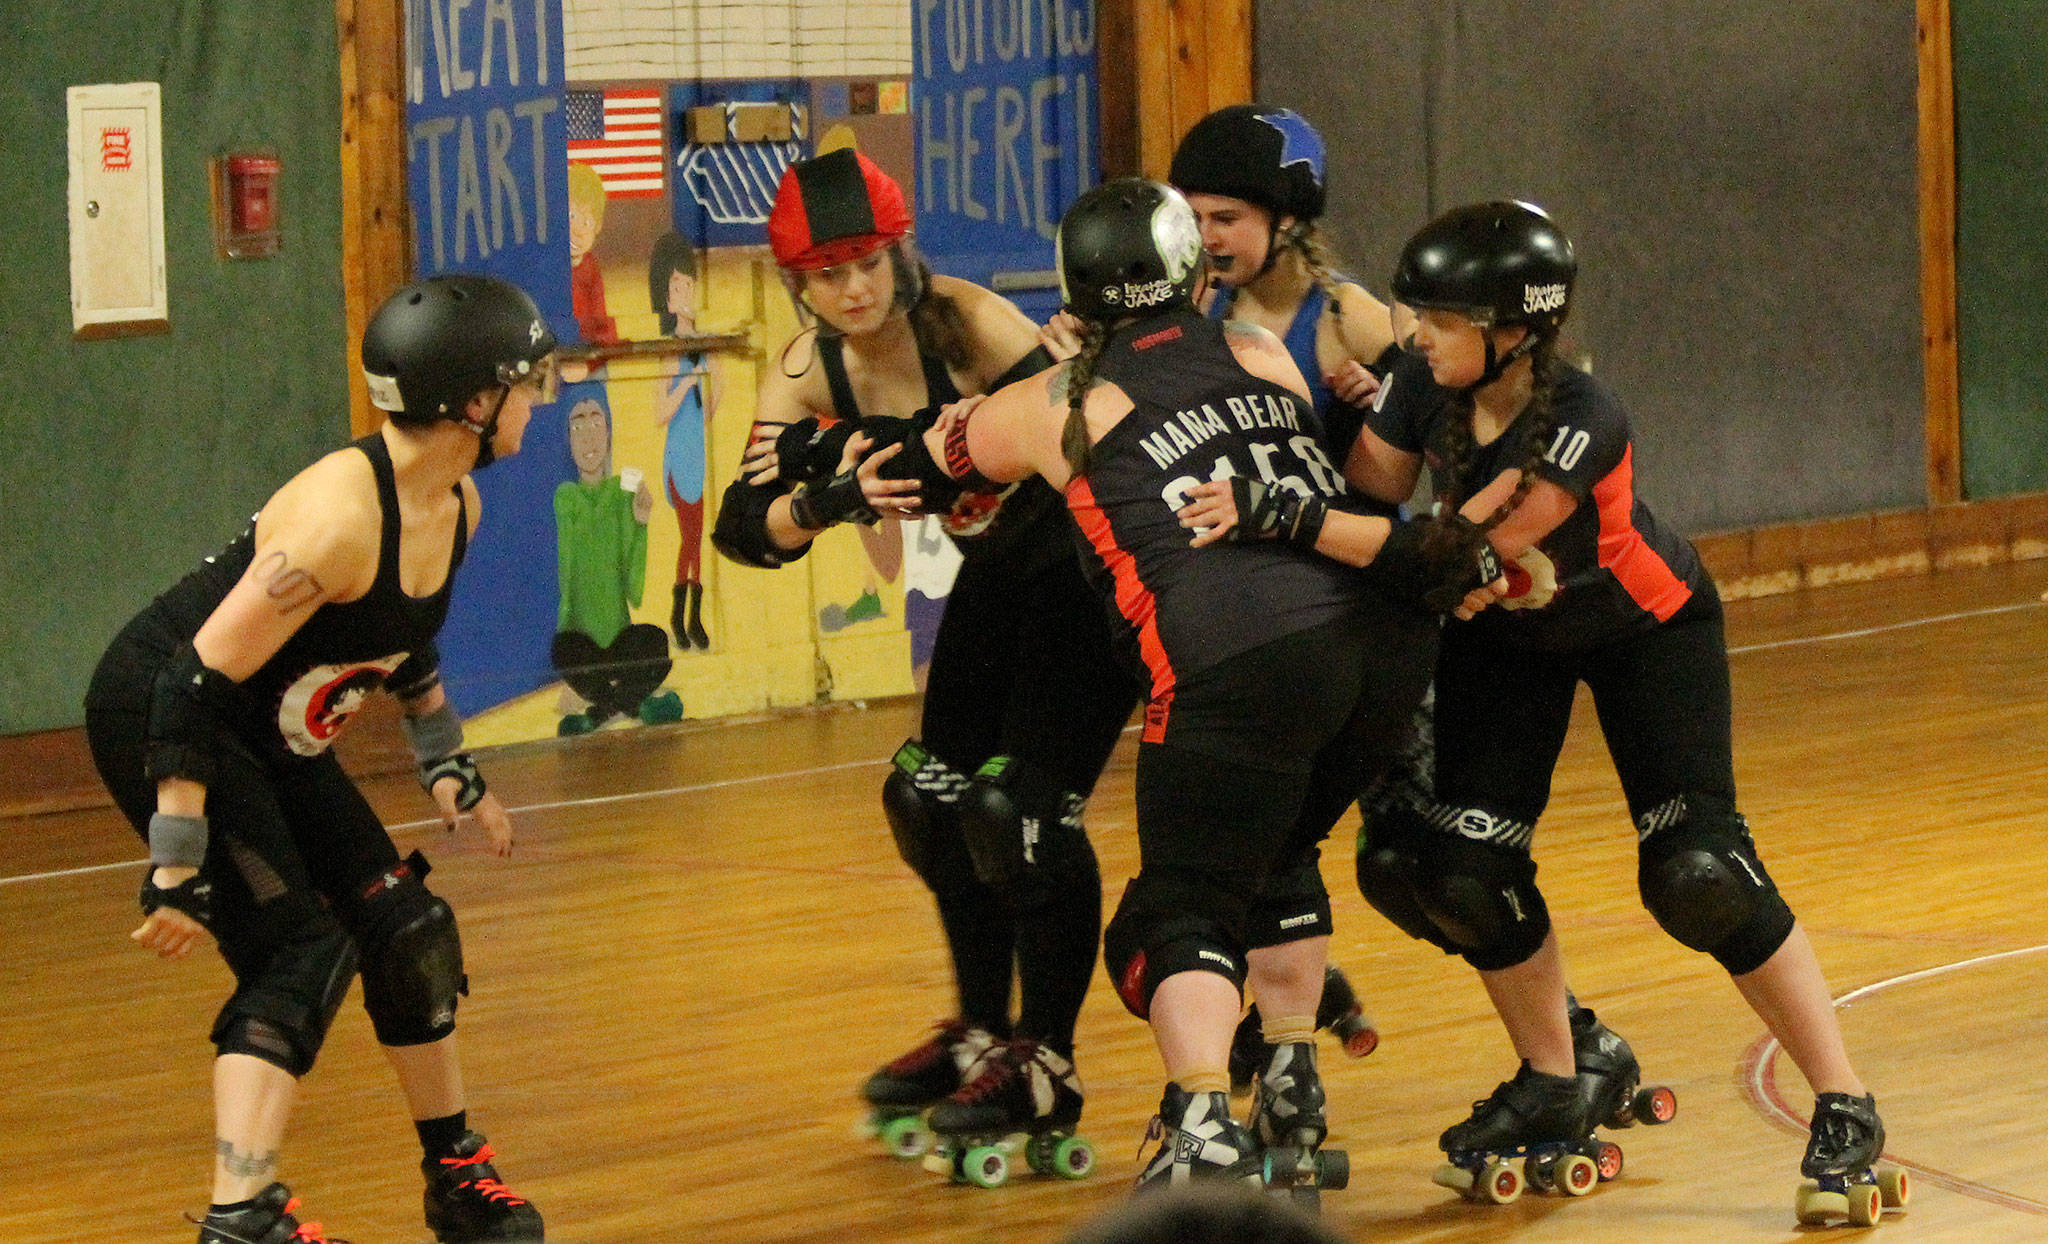 Tina Bond, Jennifer Garlington, Misty Awbrey-Ford and Nic O’Neill set up a roadblock for the Bunnies’ jammer. (Photo by Jim Waller/Whidbey News-Times)